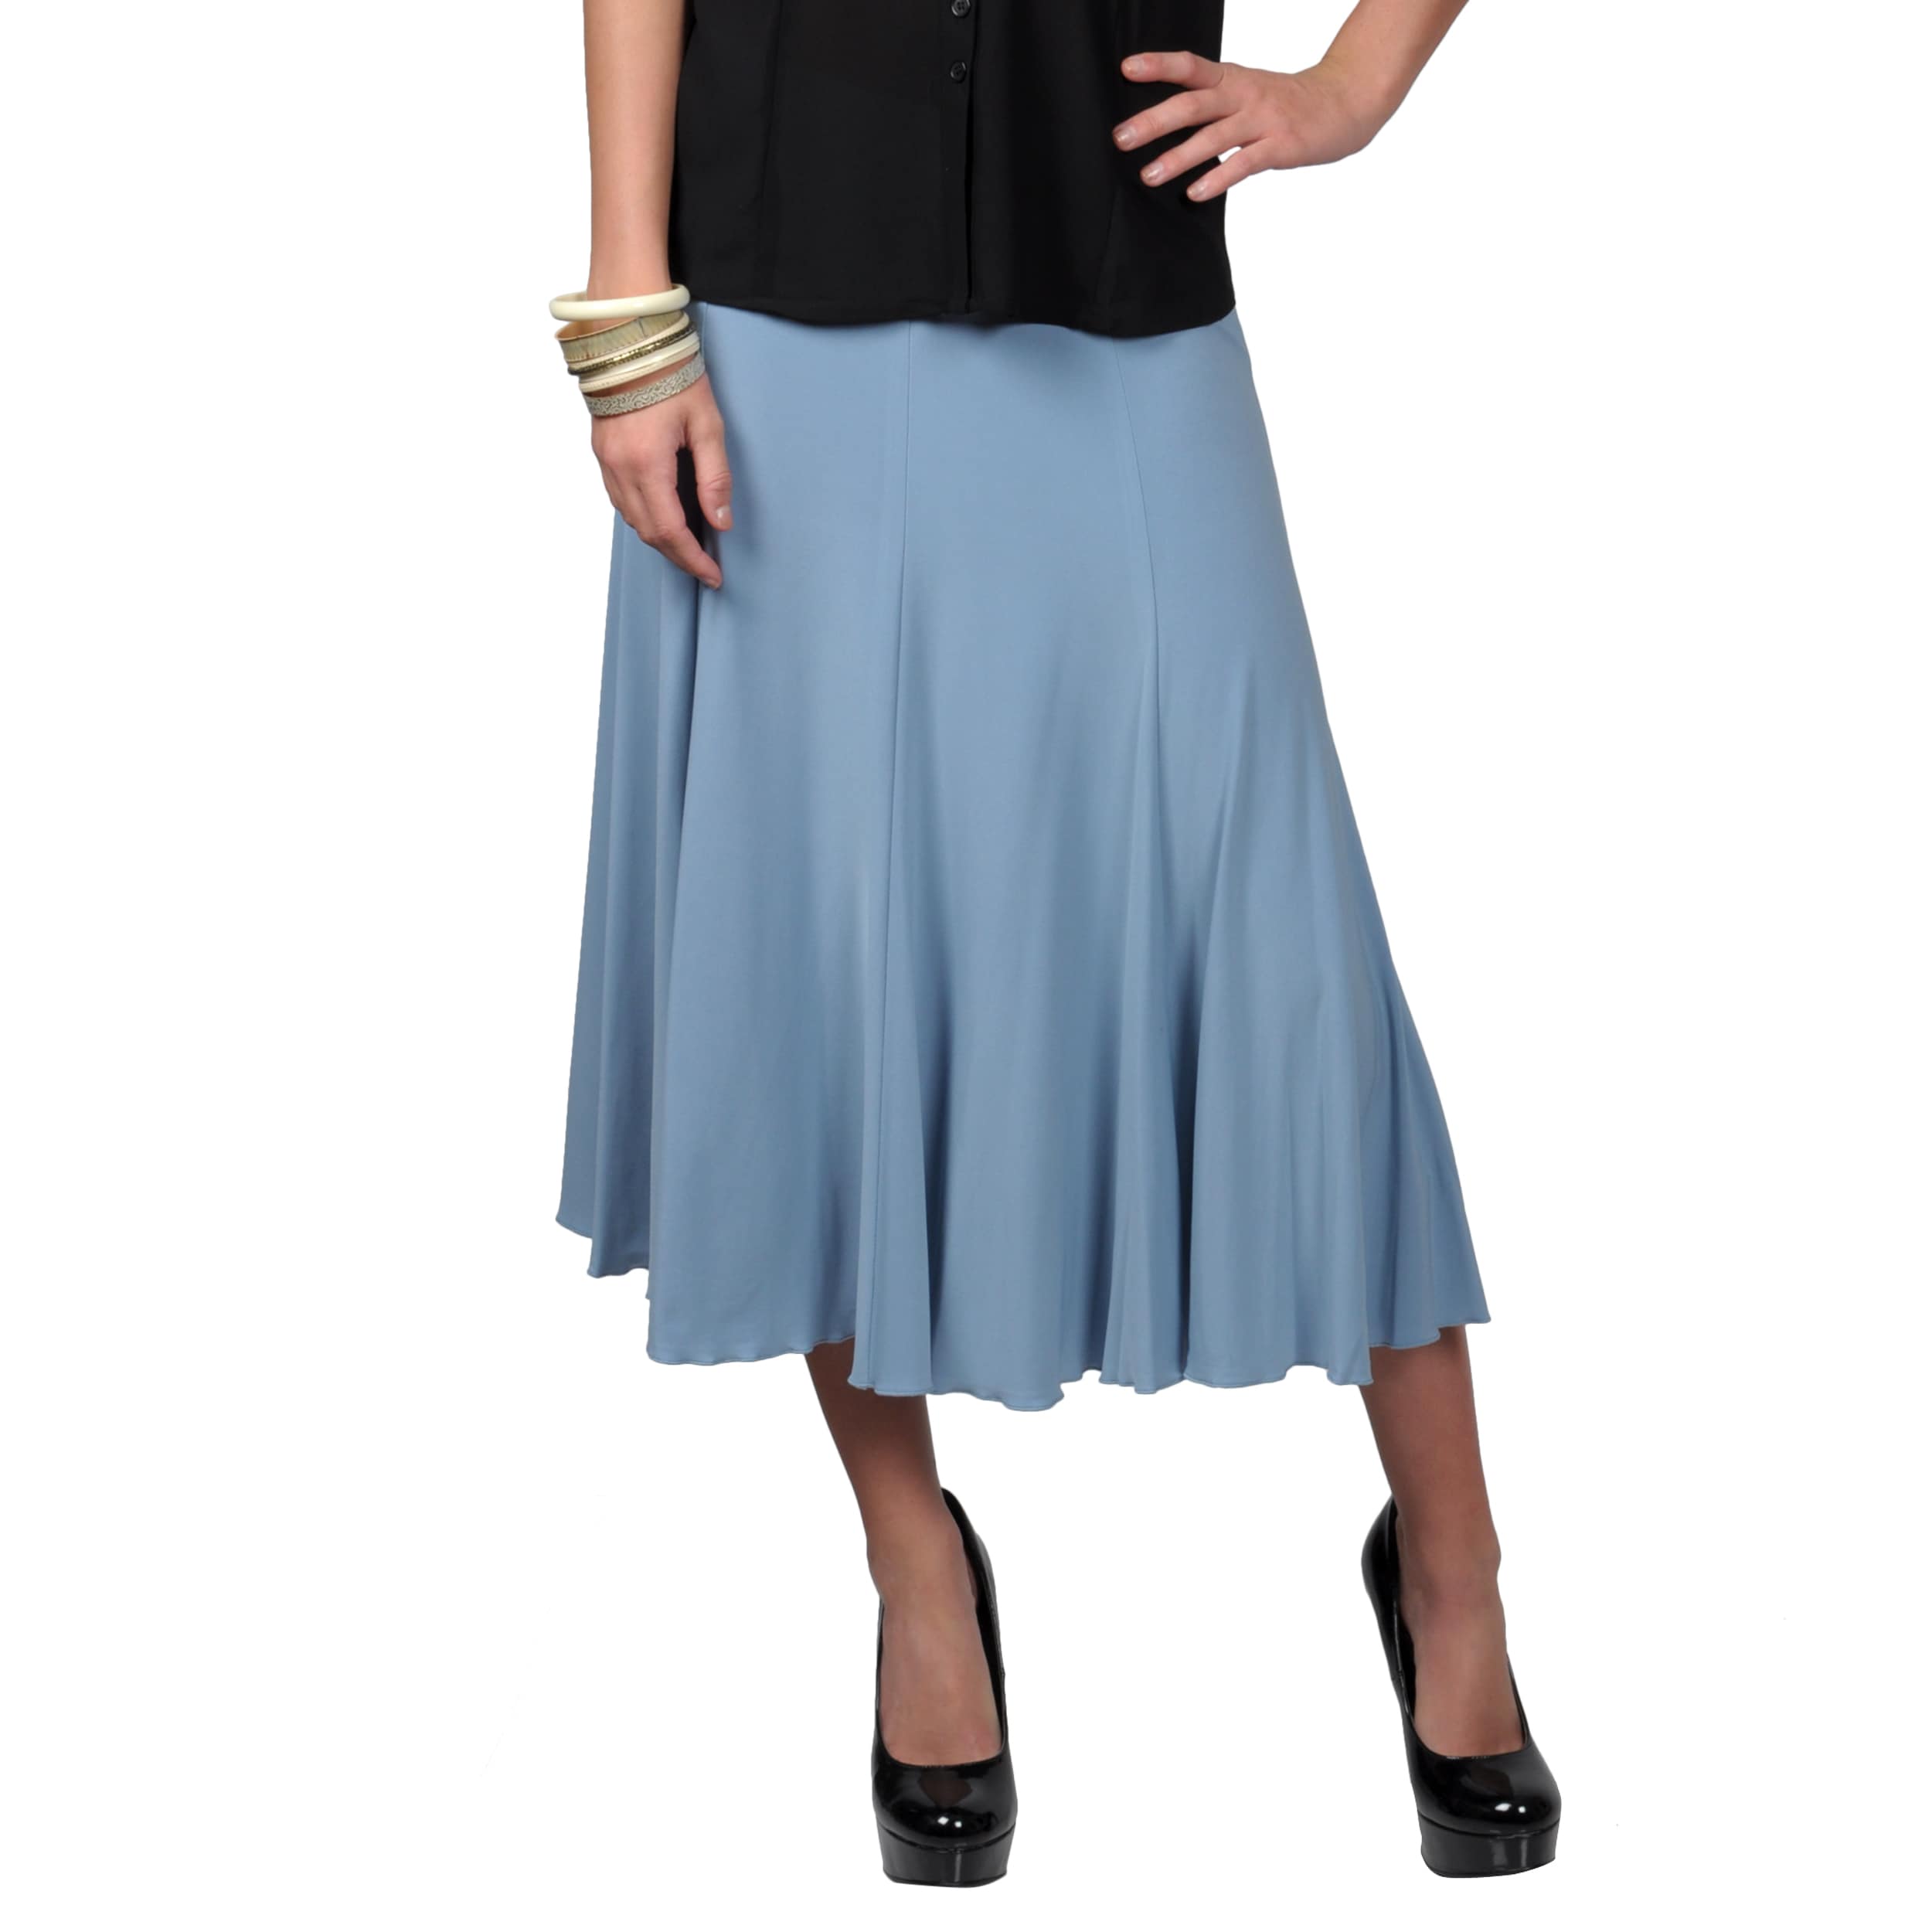 Journee Collection Womens Elastic Flowing Knit Flare Skirt